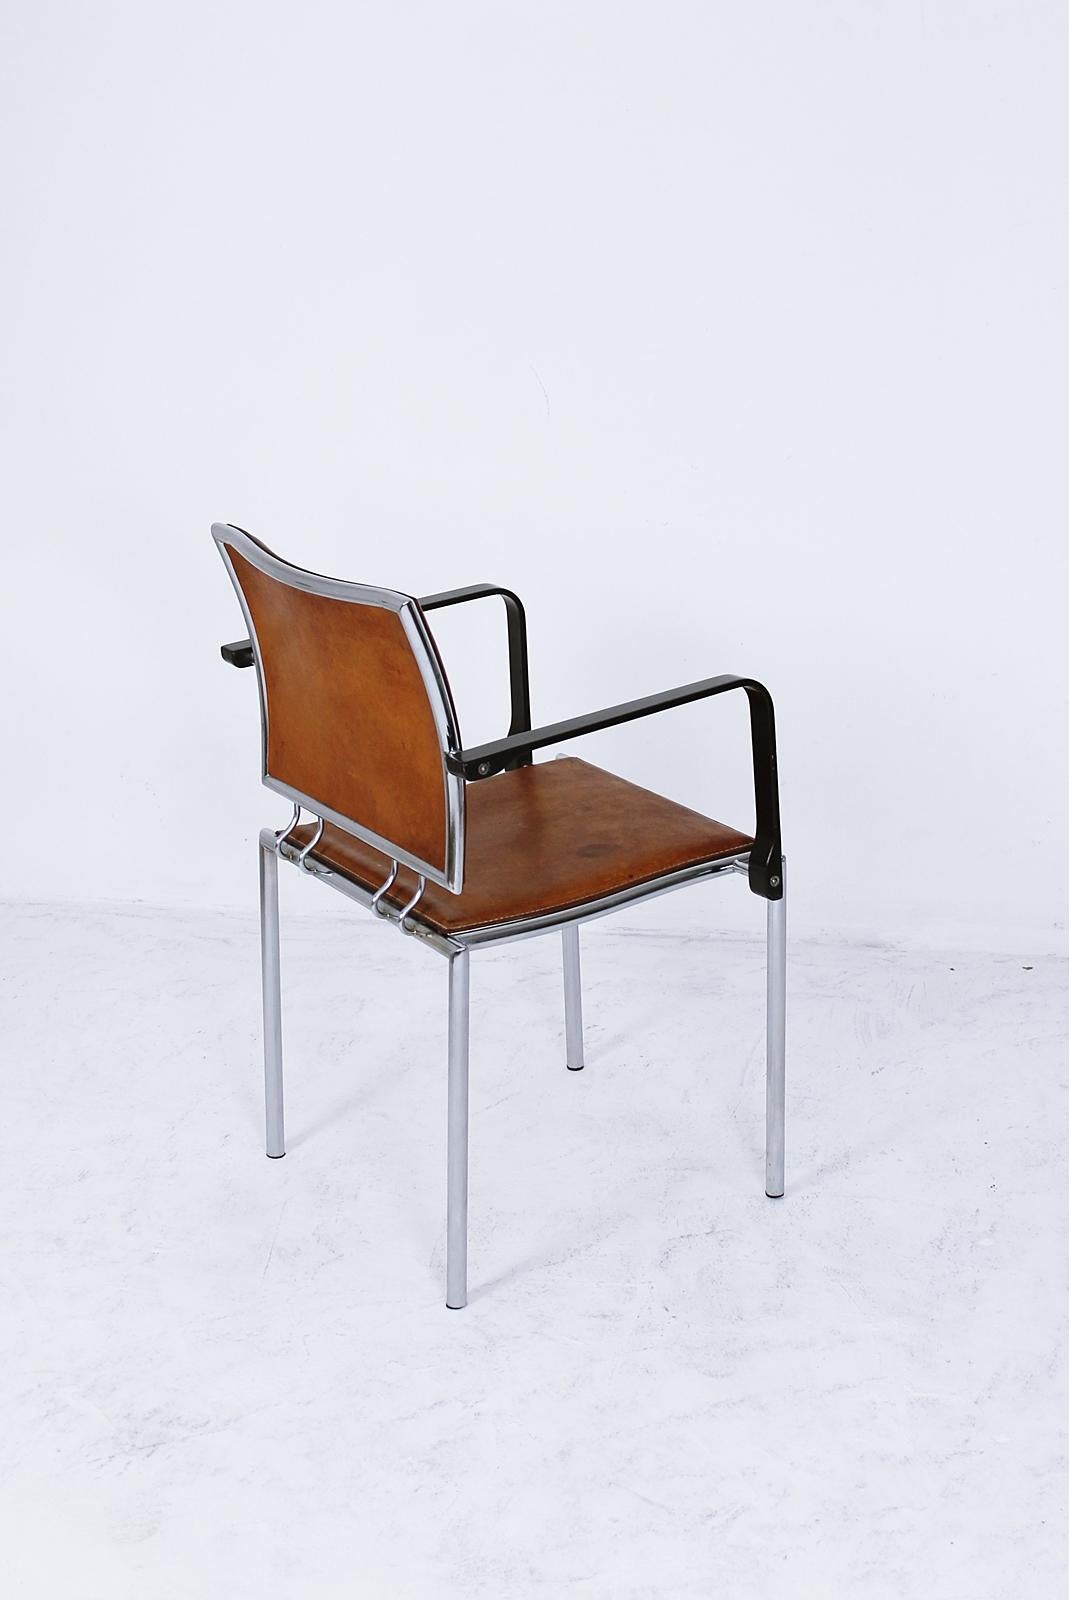 Late 20th Century Swiss Armchair Quadro Steel by Bruno Rey & Charles Polin for Dietiker, 1990s For Sale